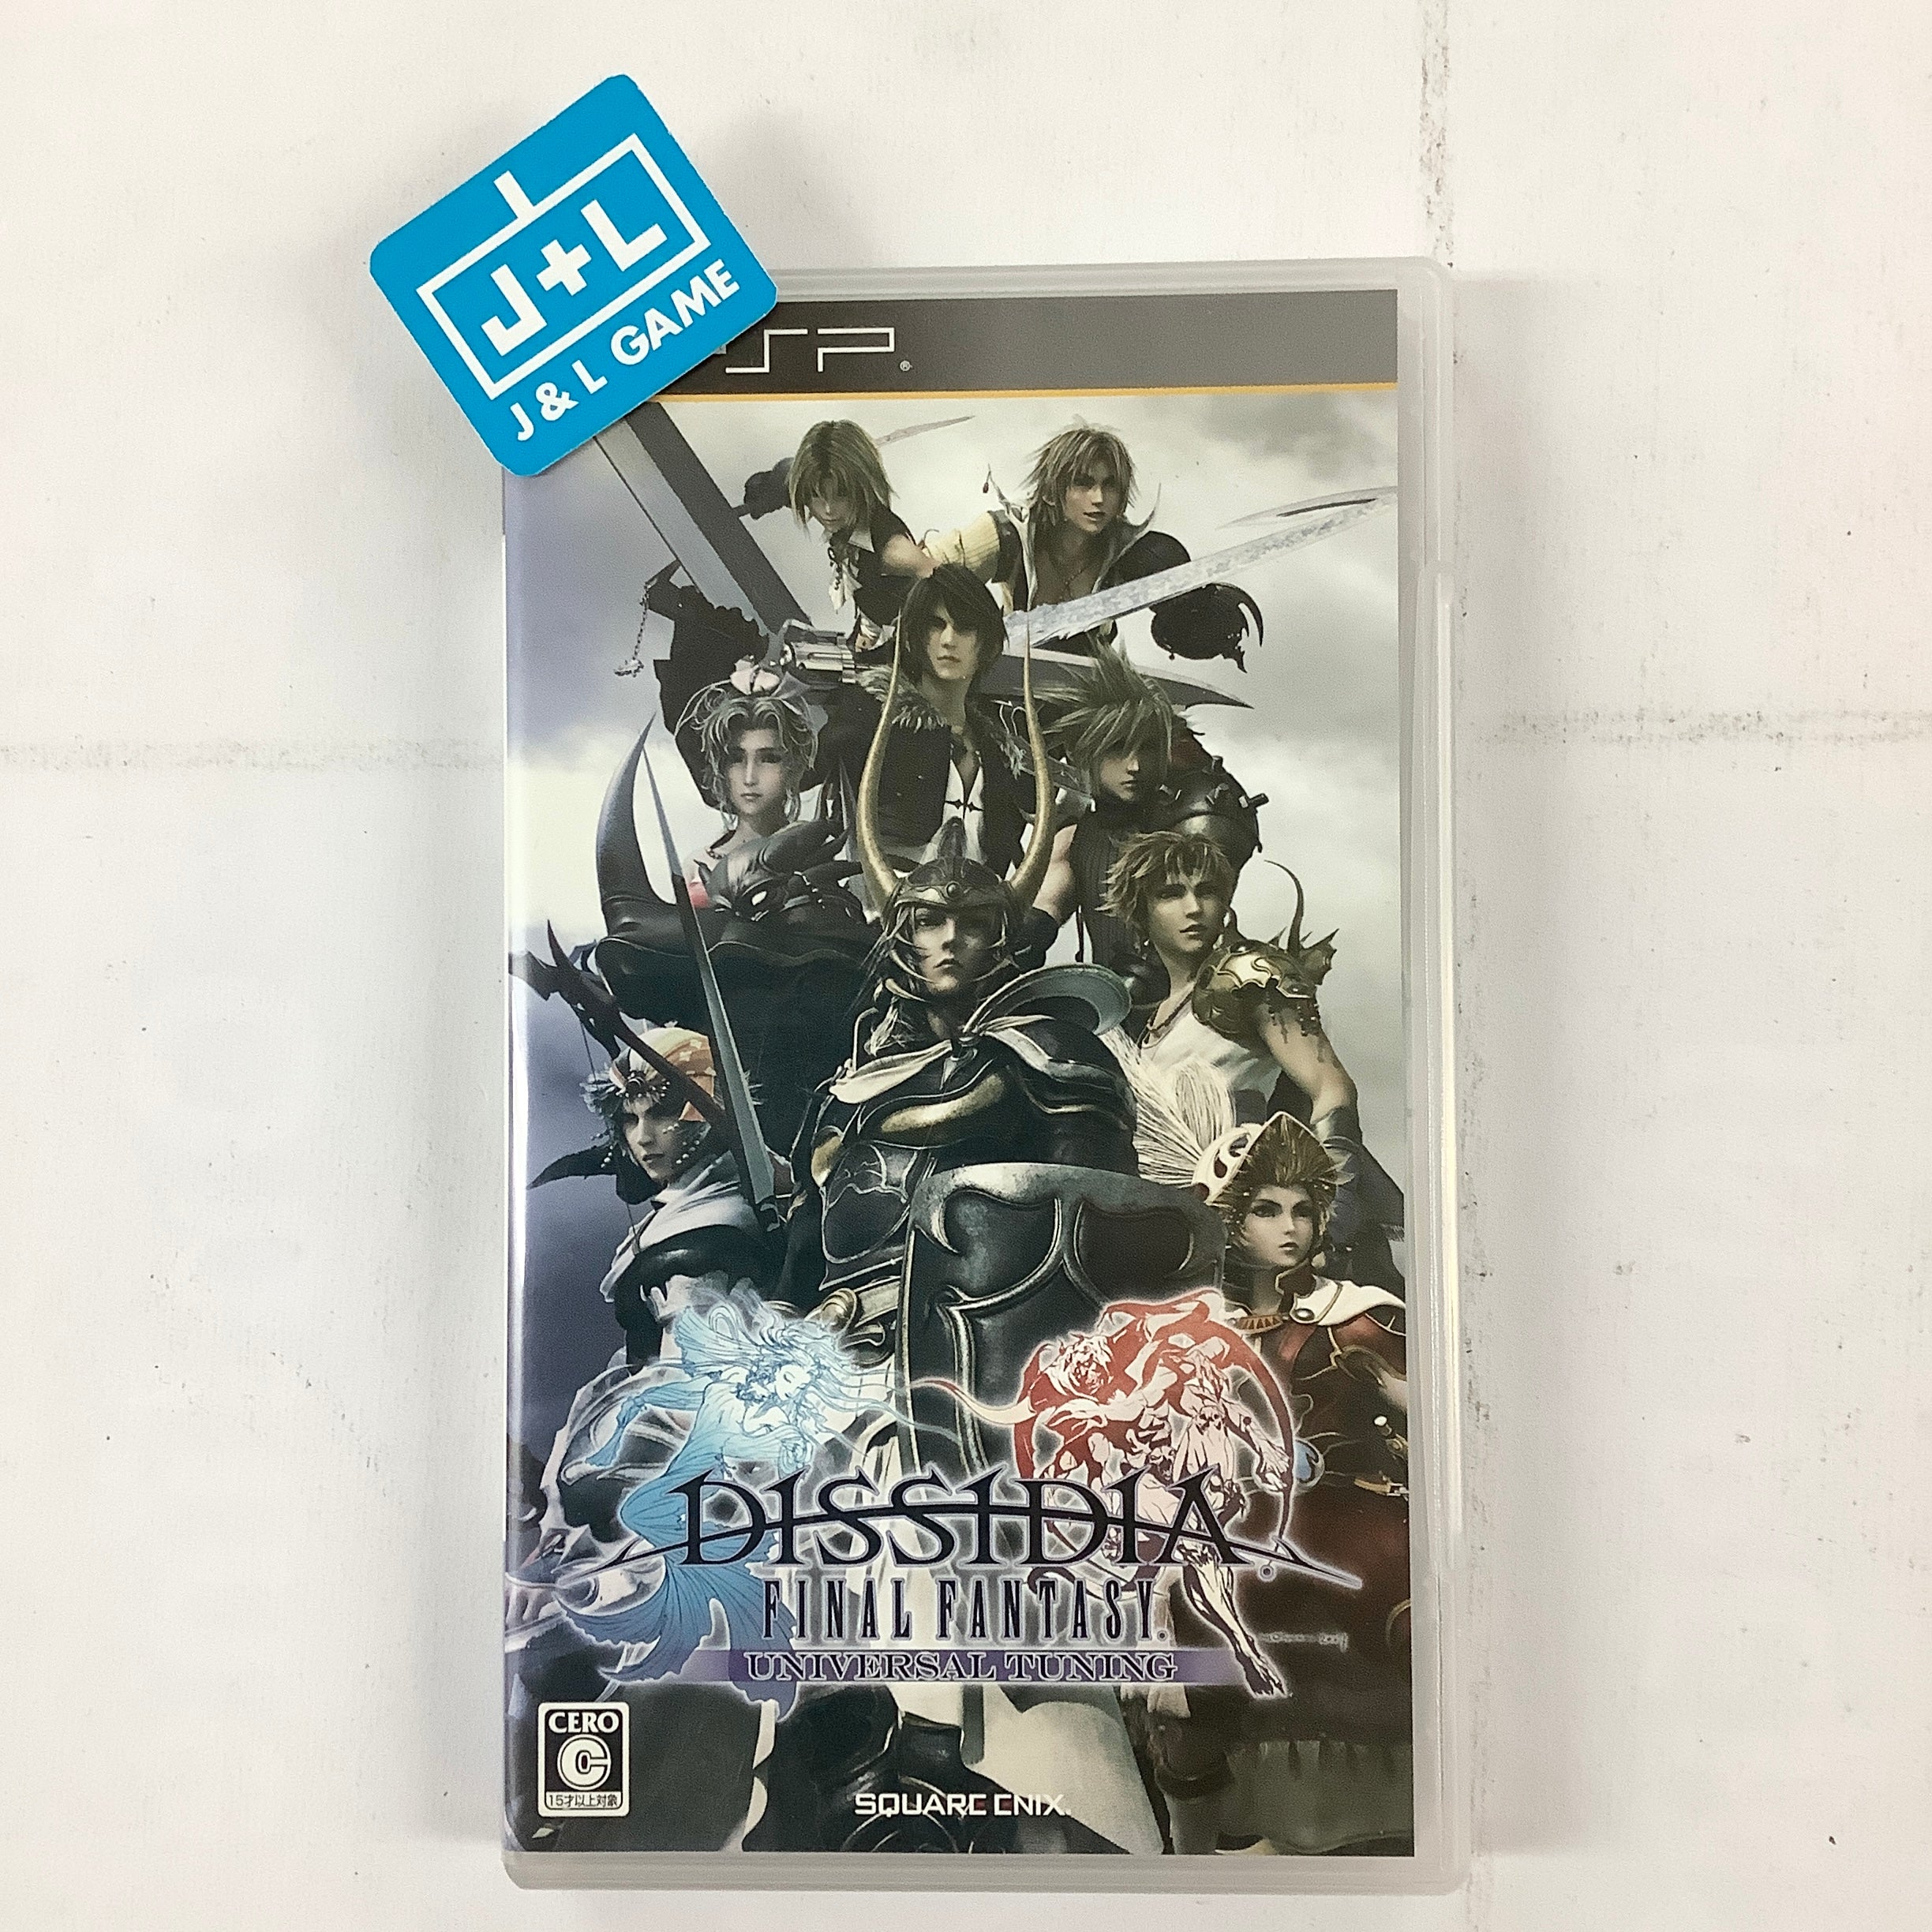 Dissidia Final Fantasy Universal Tuning - Sony PSP [Pre-Owned] (Japanese Import) Video Games Square Enix   